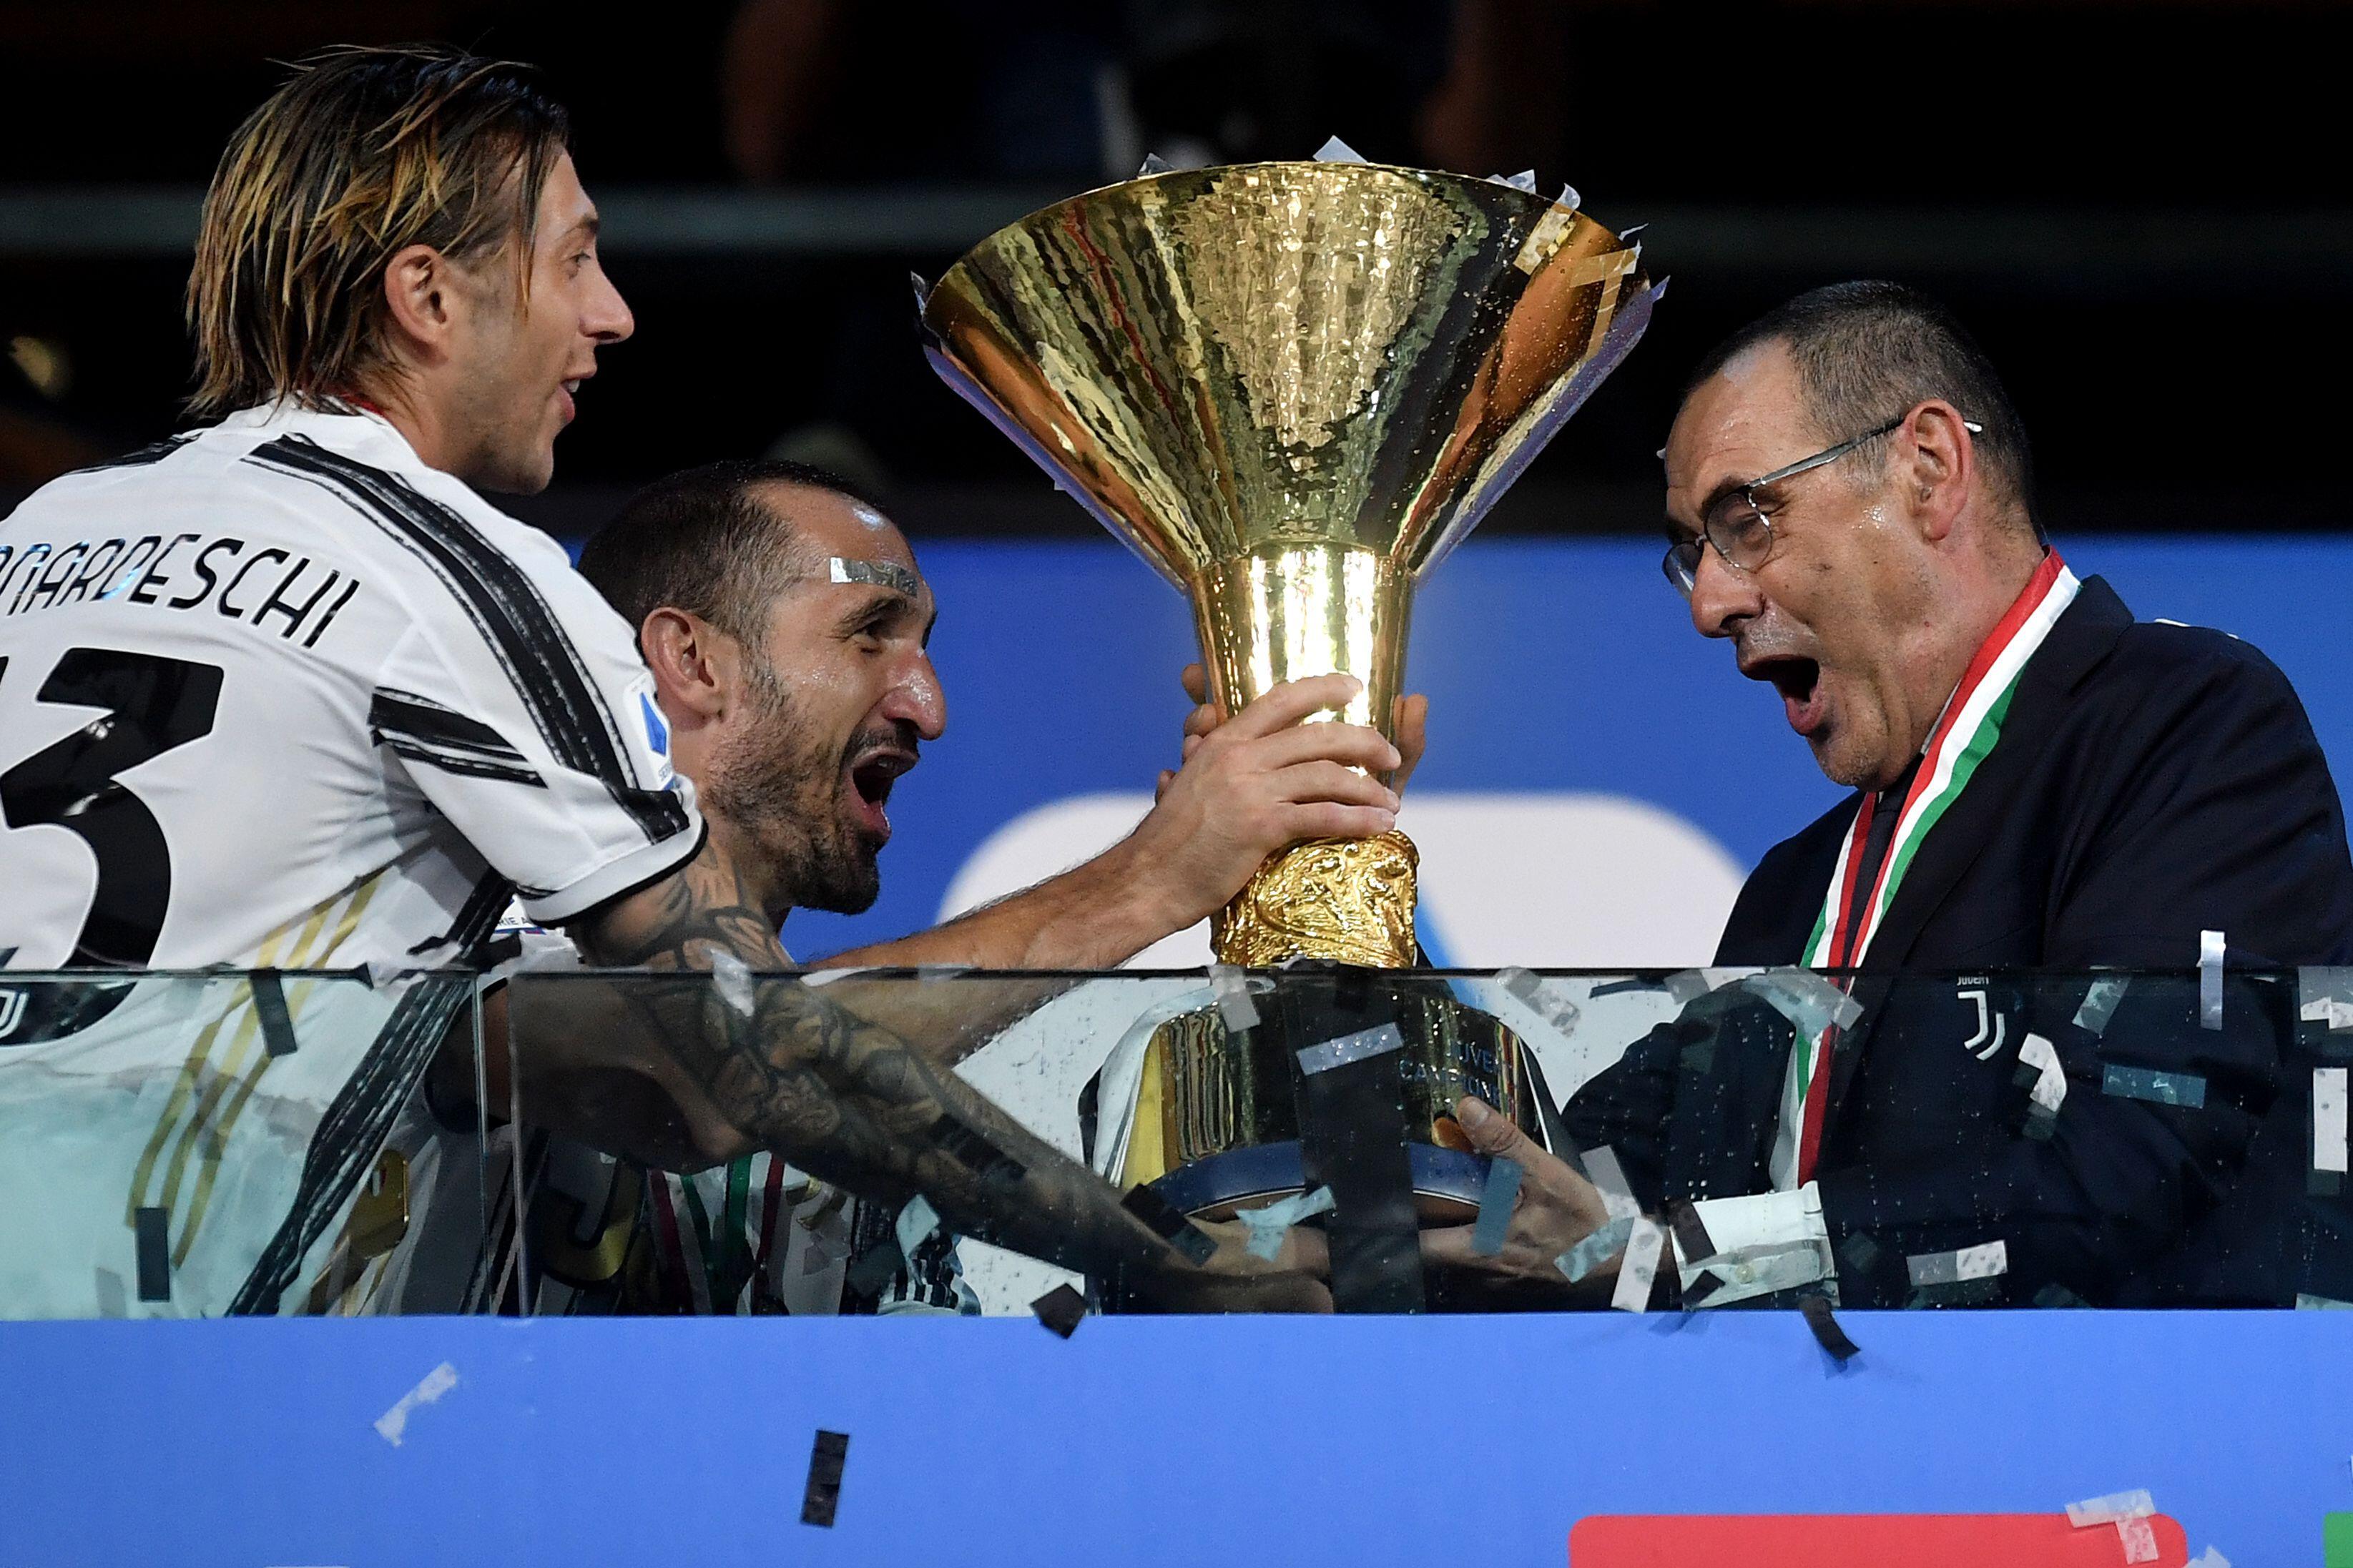 Juventus 'Could be Relegated to Serie B and Stripped of Scudetto' - Reports  - News18